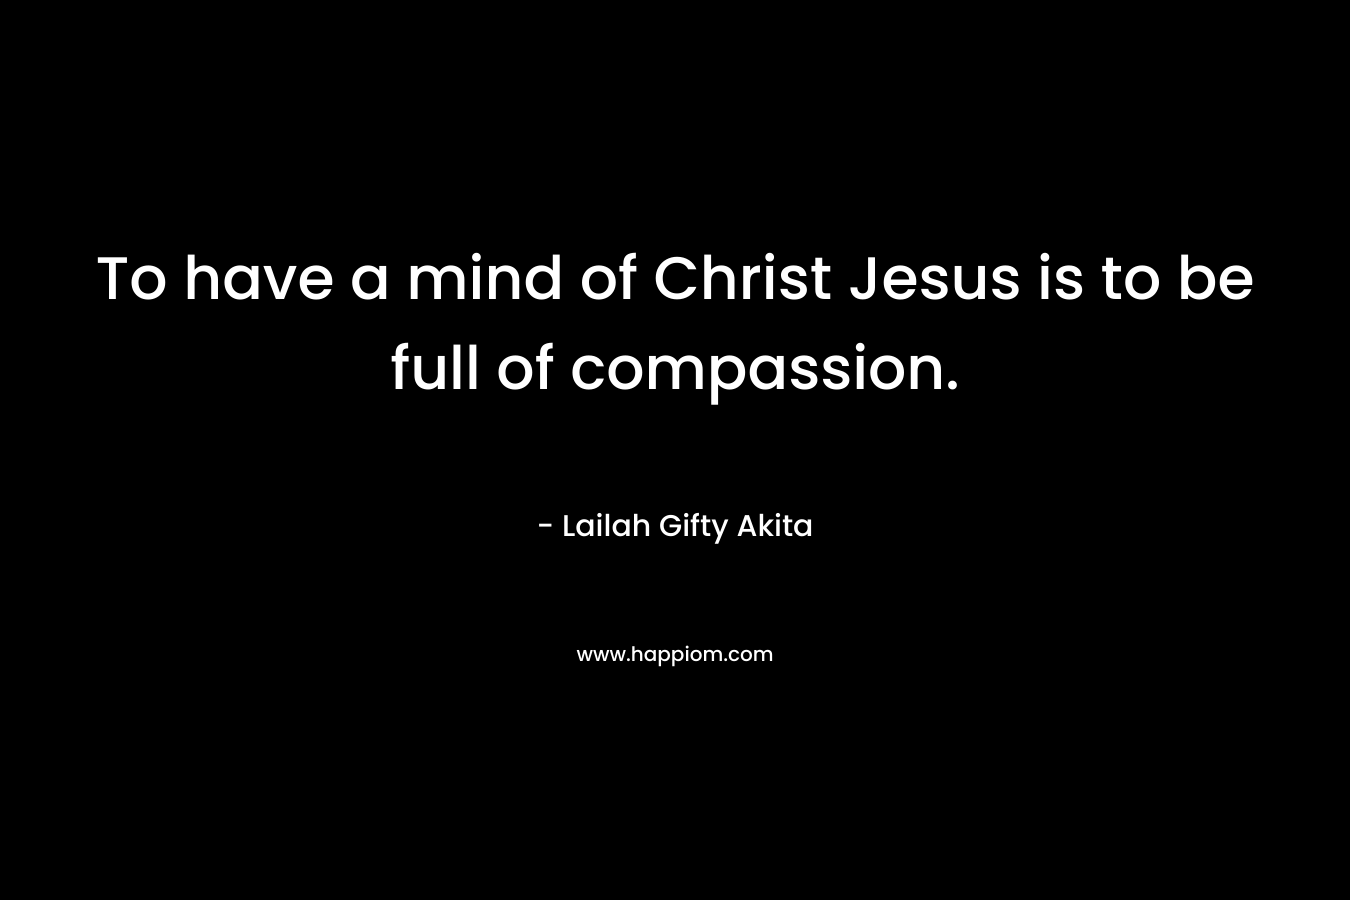 To have a mind of Christ Jesus is to be full of compassion.